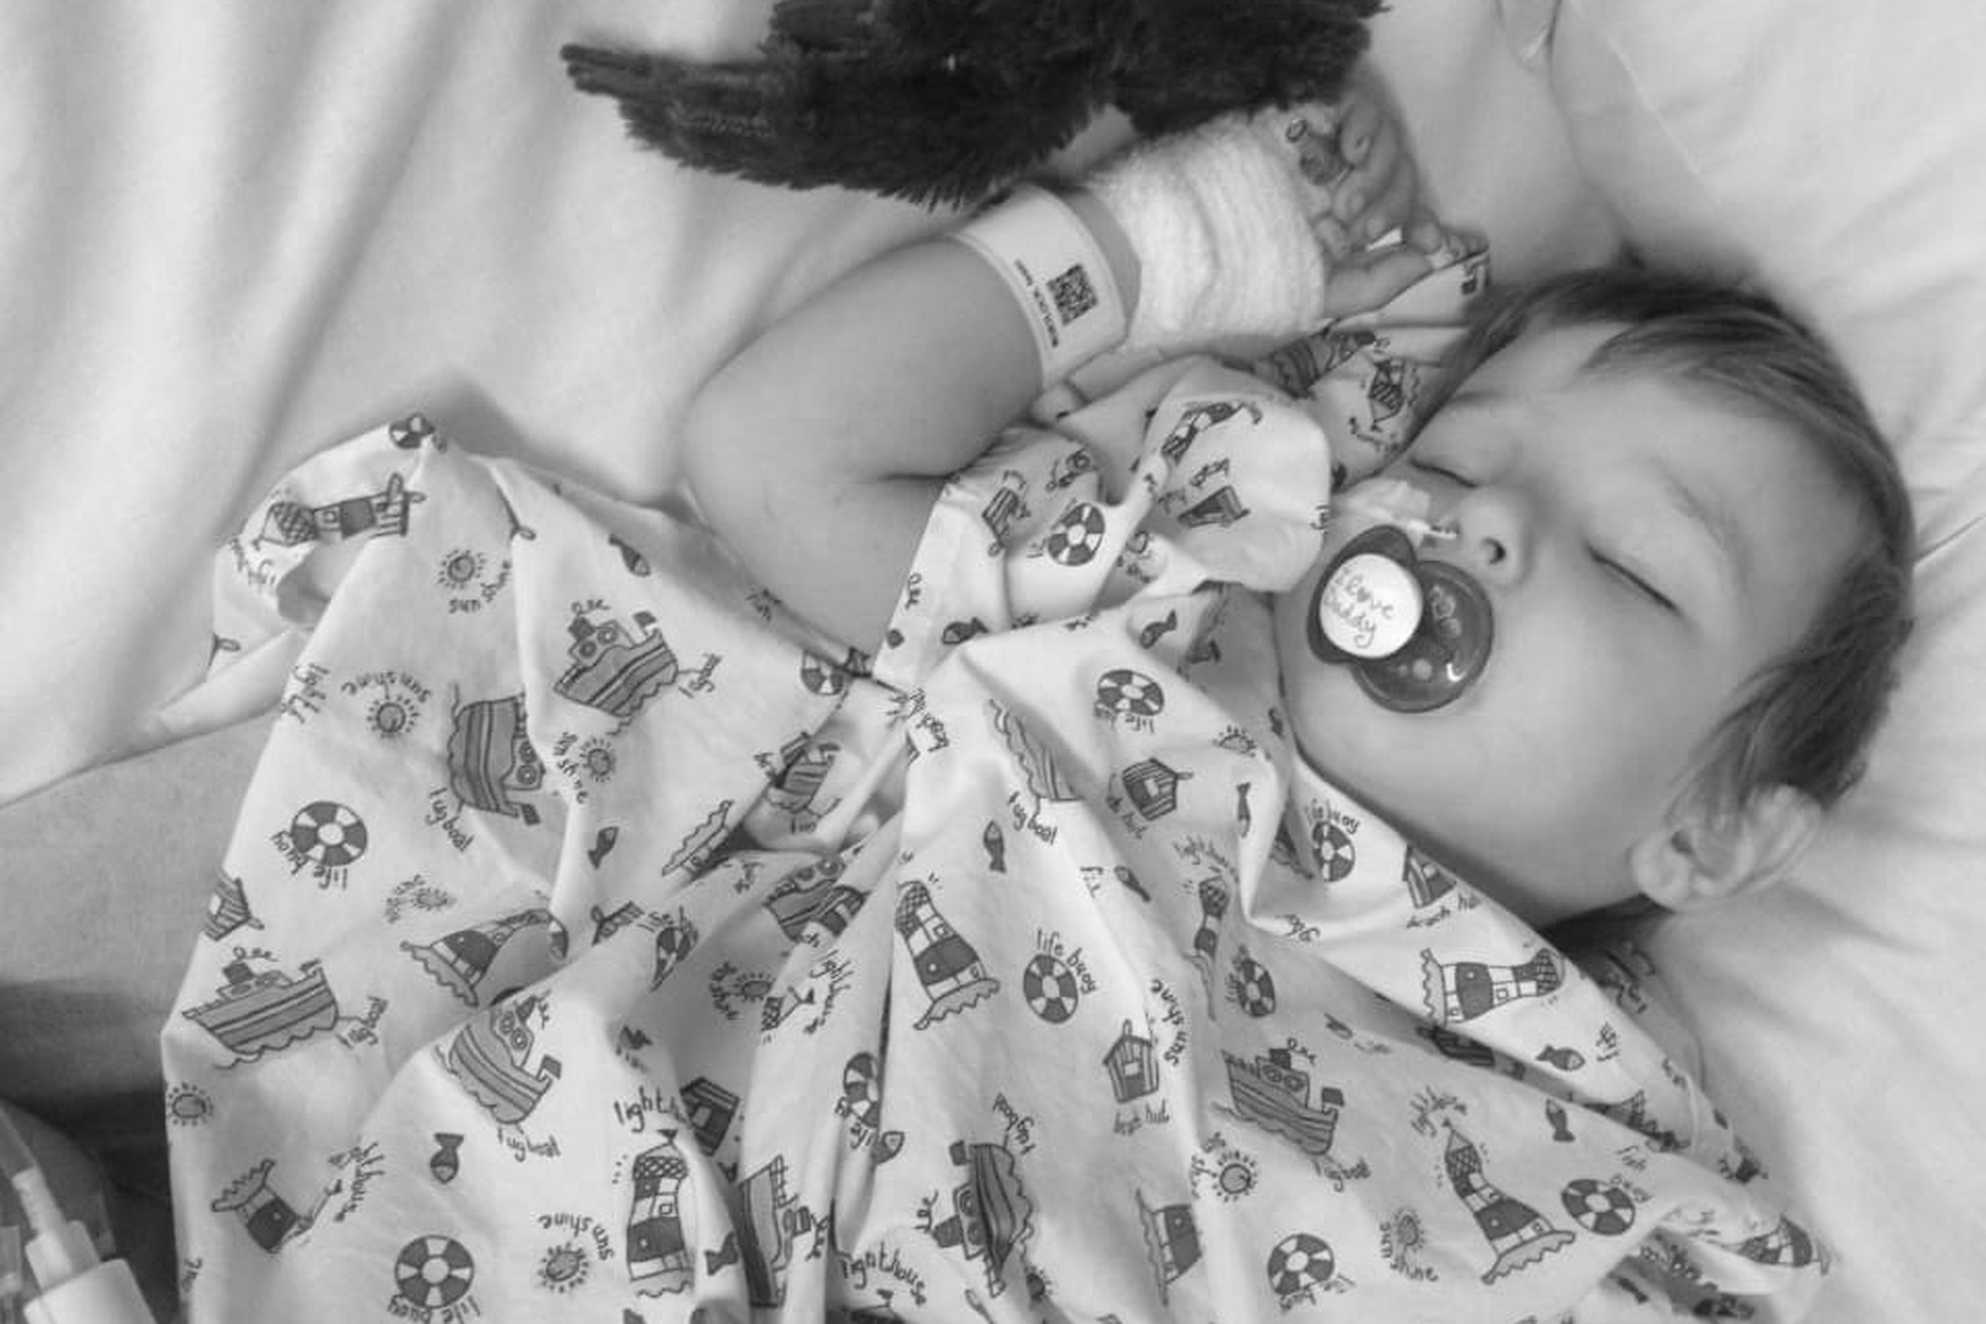 A black and white photo of Isaac in his hospital bed while undergoing treatment.